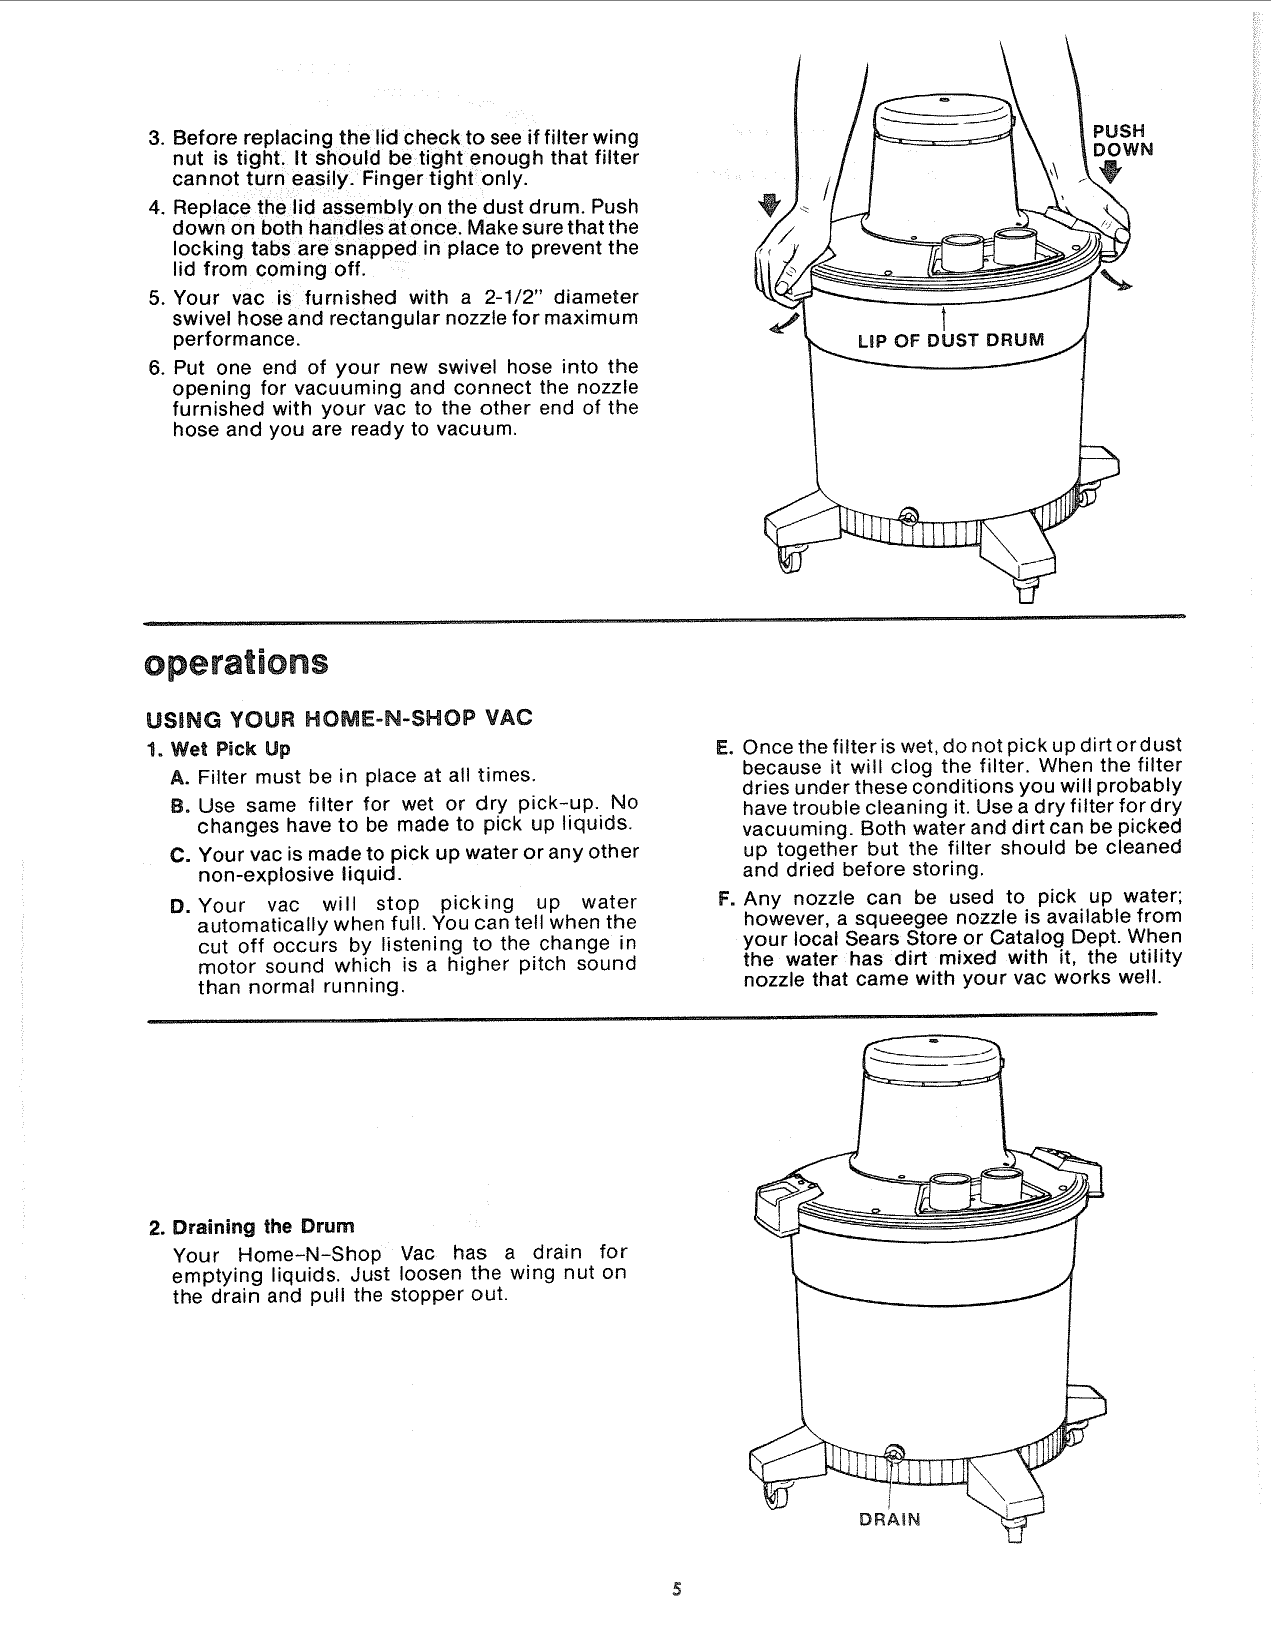 Page 5 of 12 - Craftsman 113178200 User Manual  16 GALLON HOME-N-SHOP VAC - Manuals And Guides L0903557